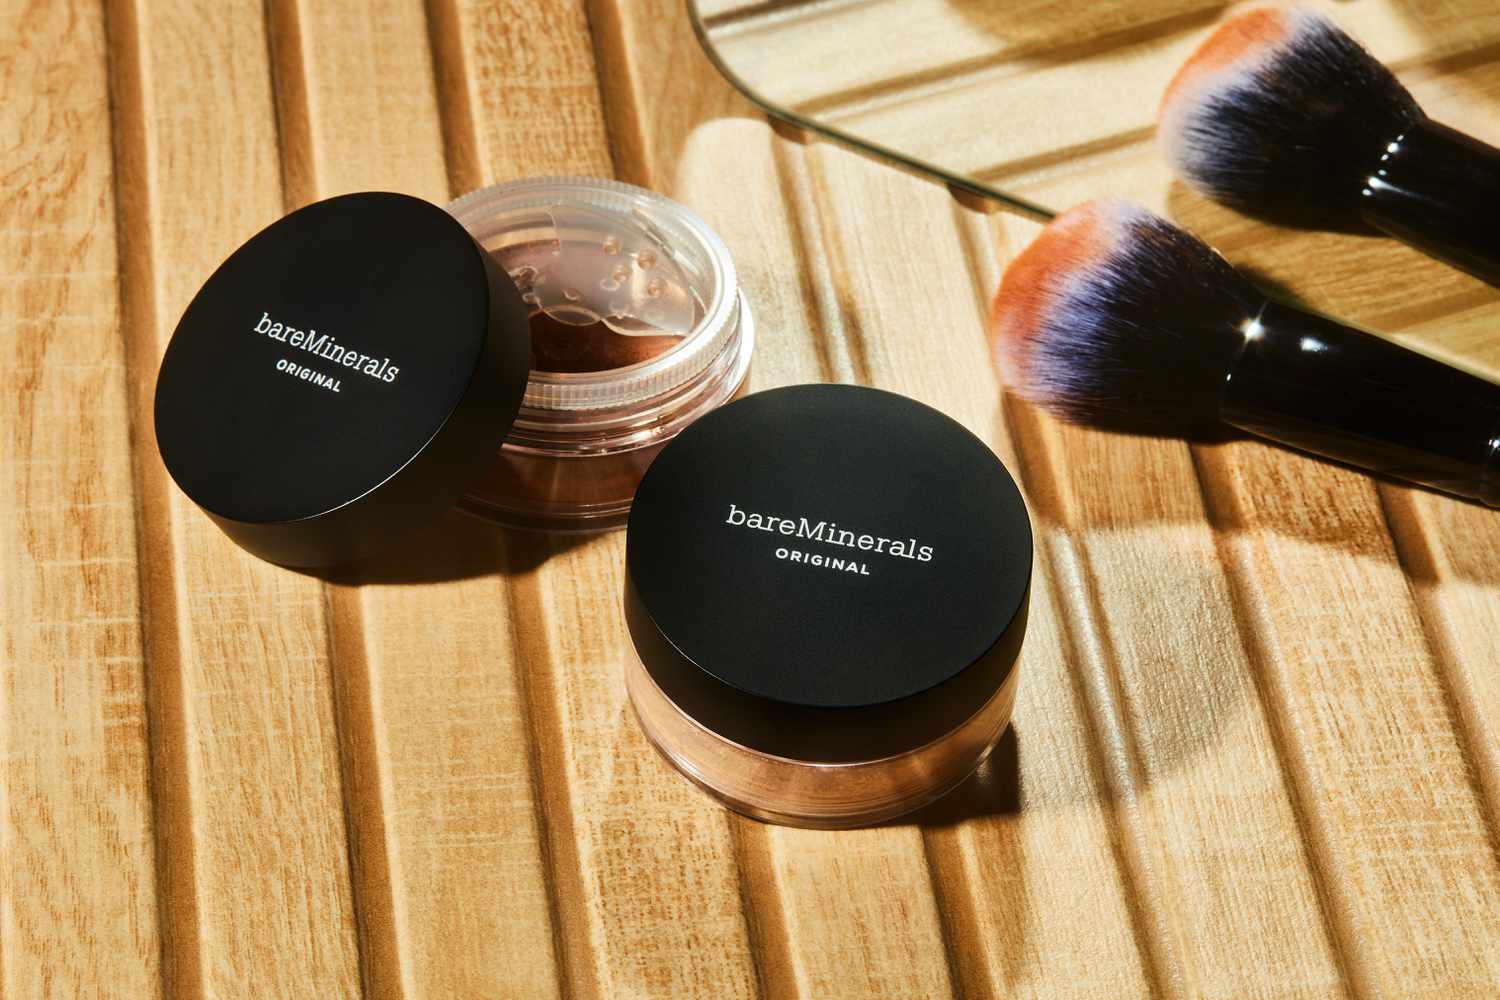 Two jars of bareMinerals Original Loose Powder Mineral Foundation SPF 15 with two brushes on wood surface